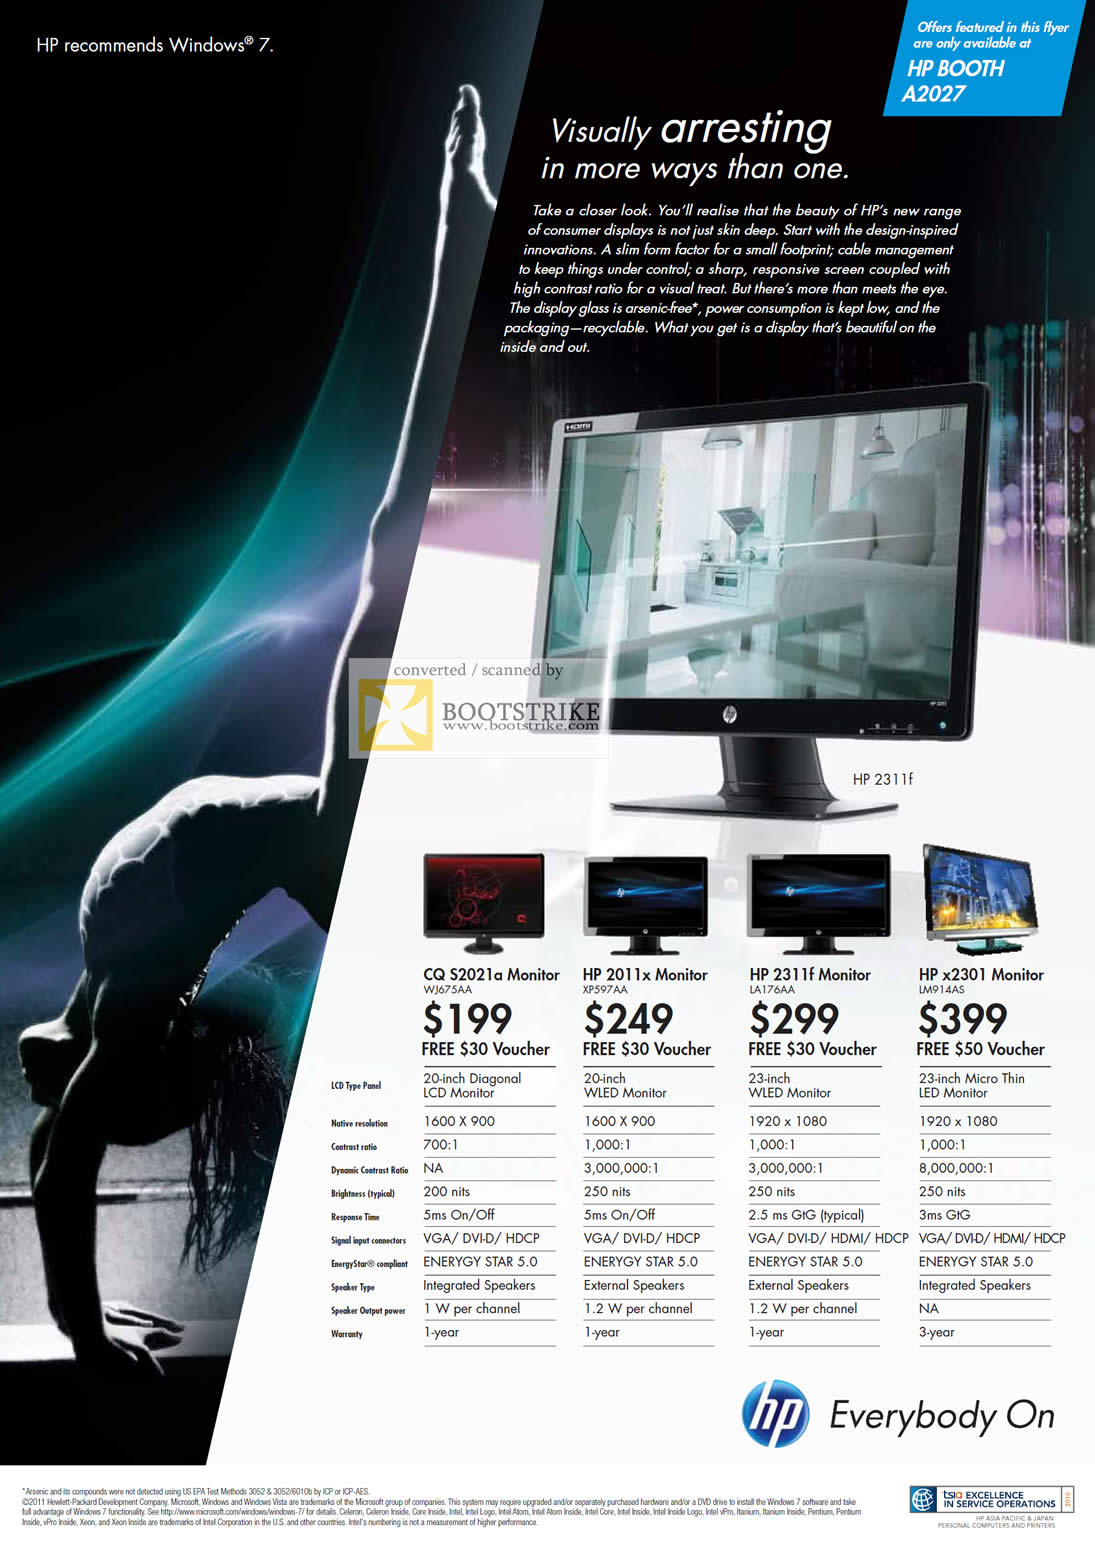 PC Show 2011 price list image brochure of HP Monitors LCD WLED LED CQ S2021a 2011x 2311f X2301